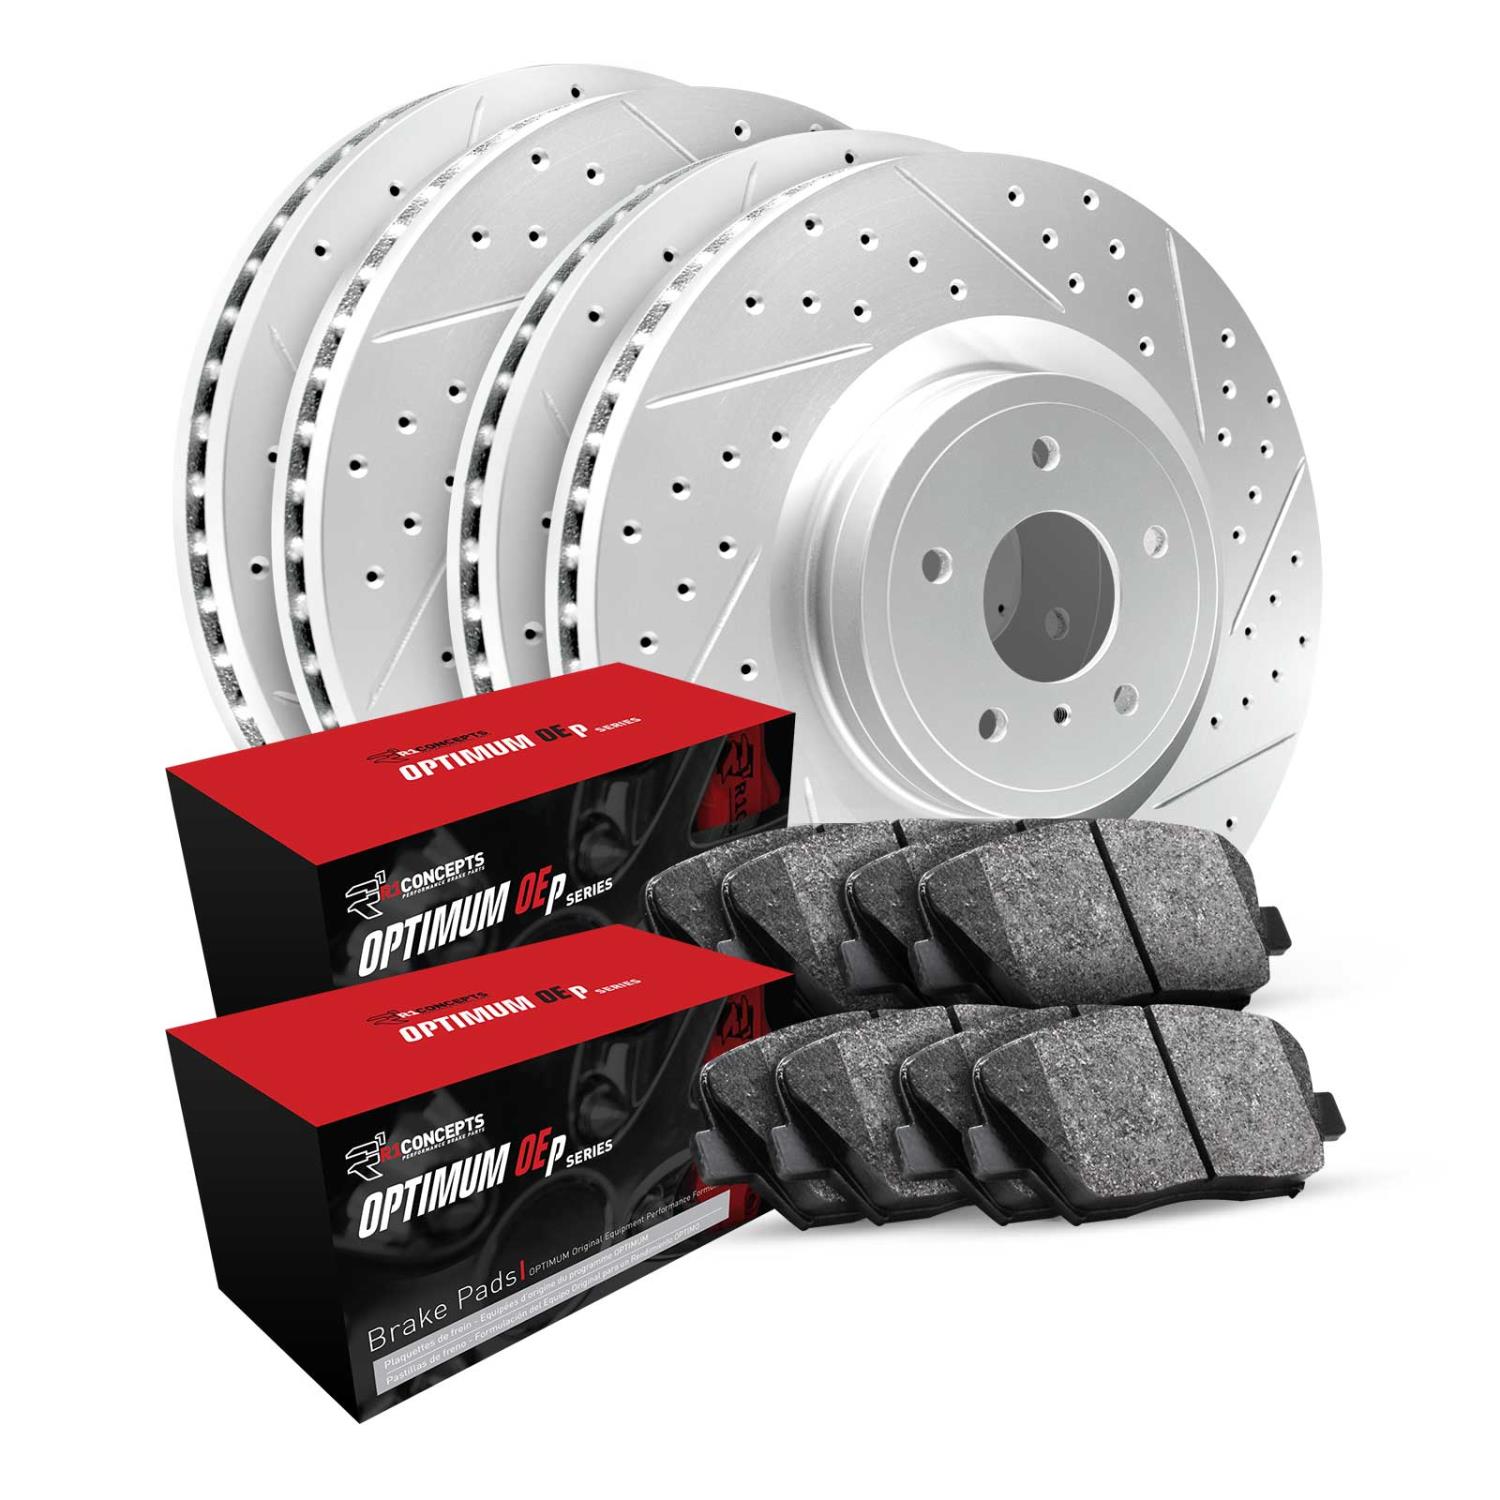 GEO-Carbon Brake Rotor Set w/Optimum OE Pads, 2018-2020 Fits Multiple Makes/Models, Position: Front & Rear